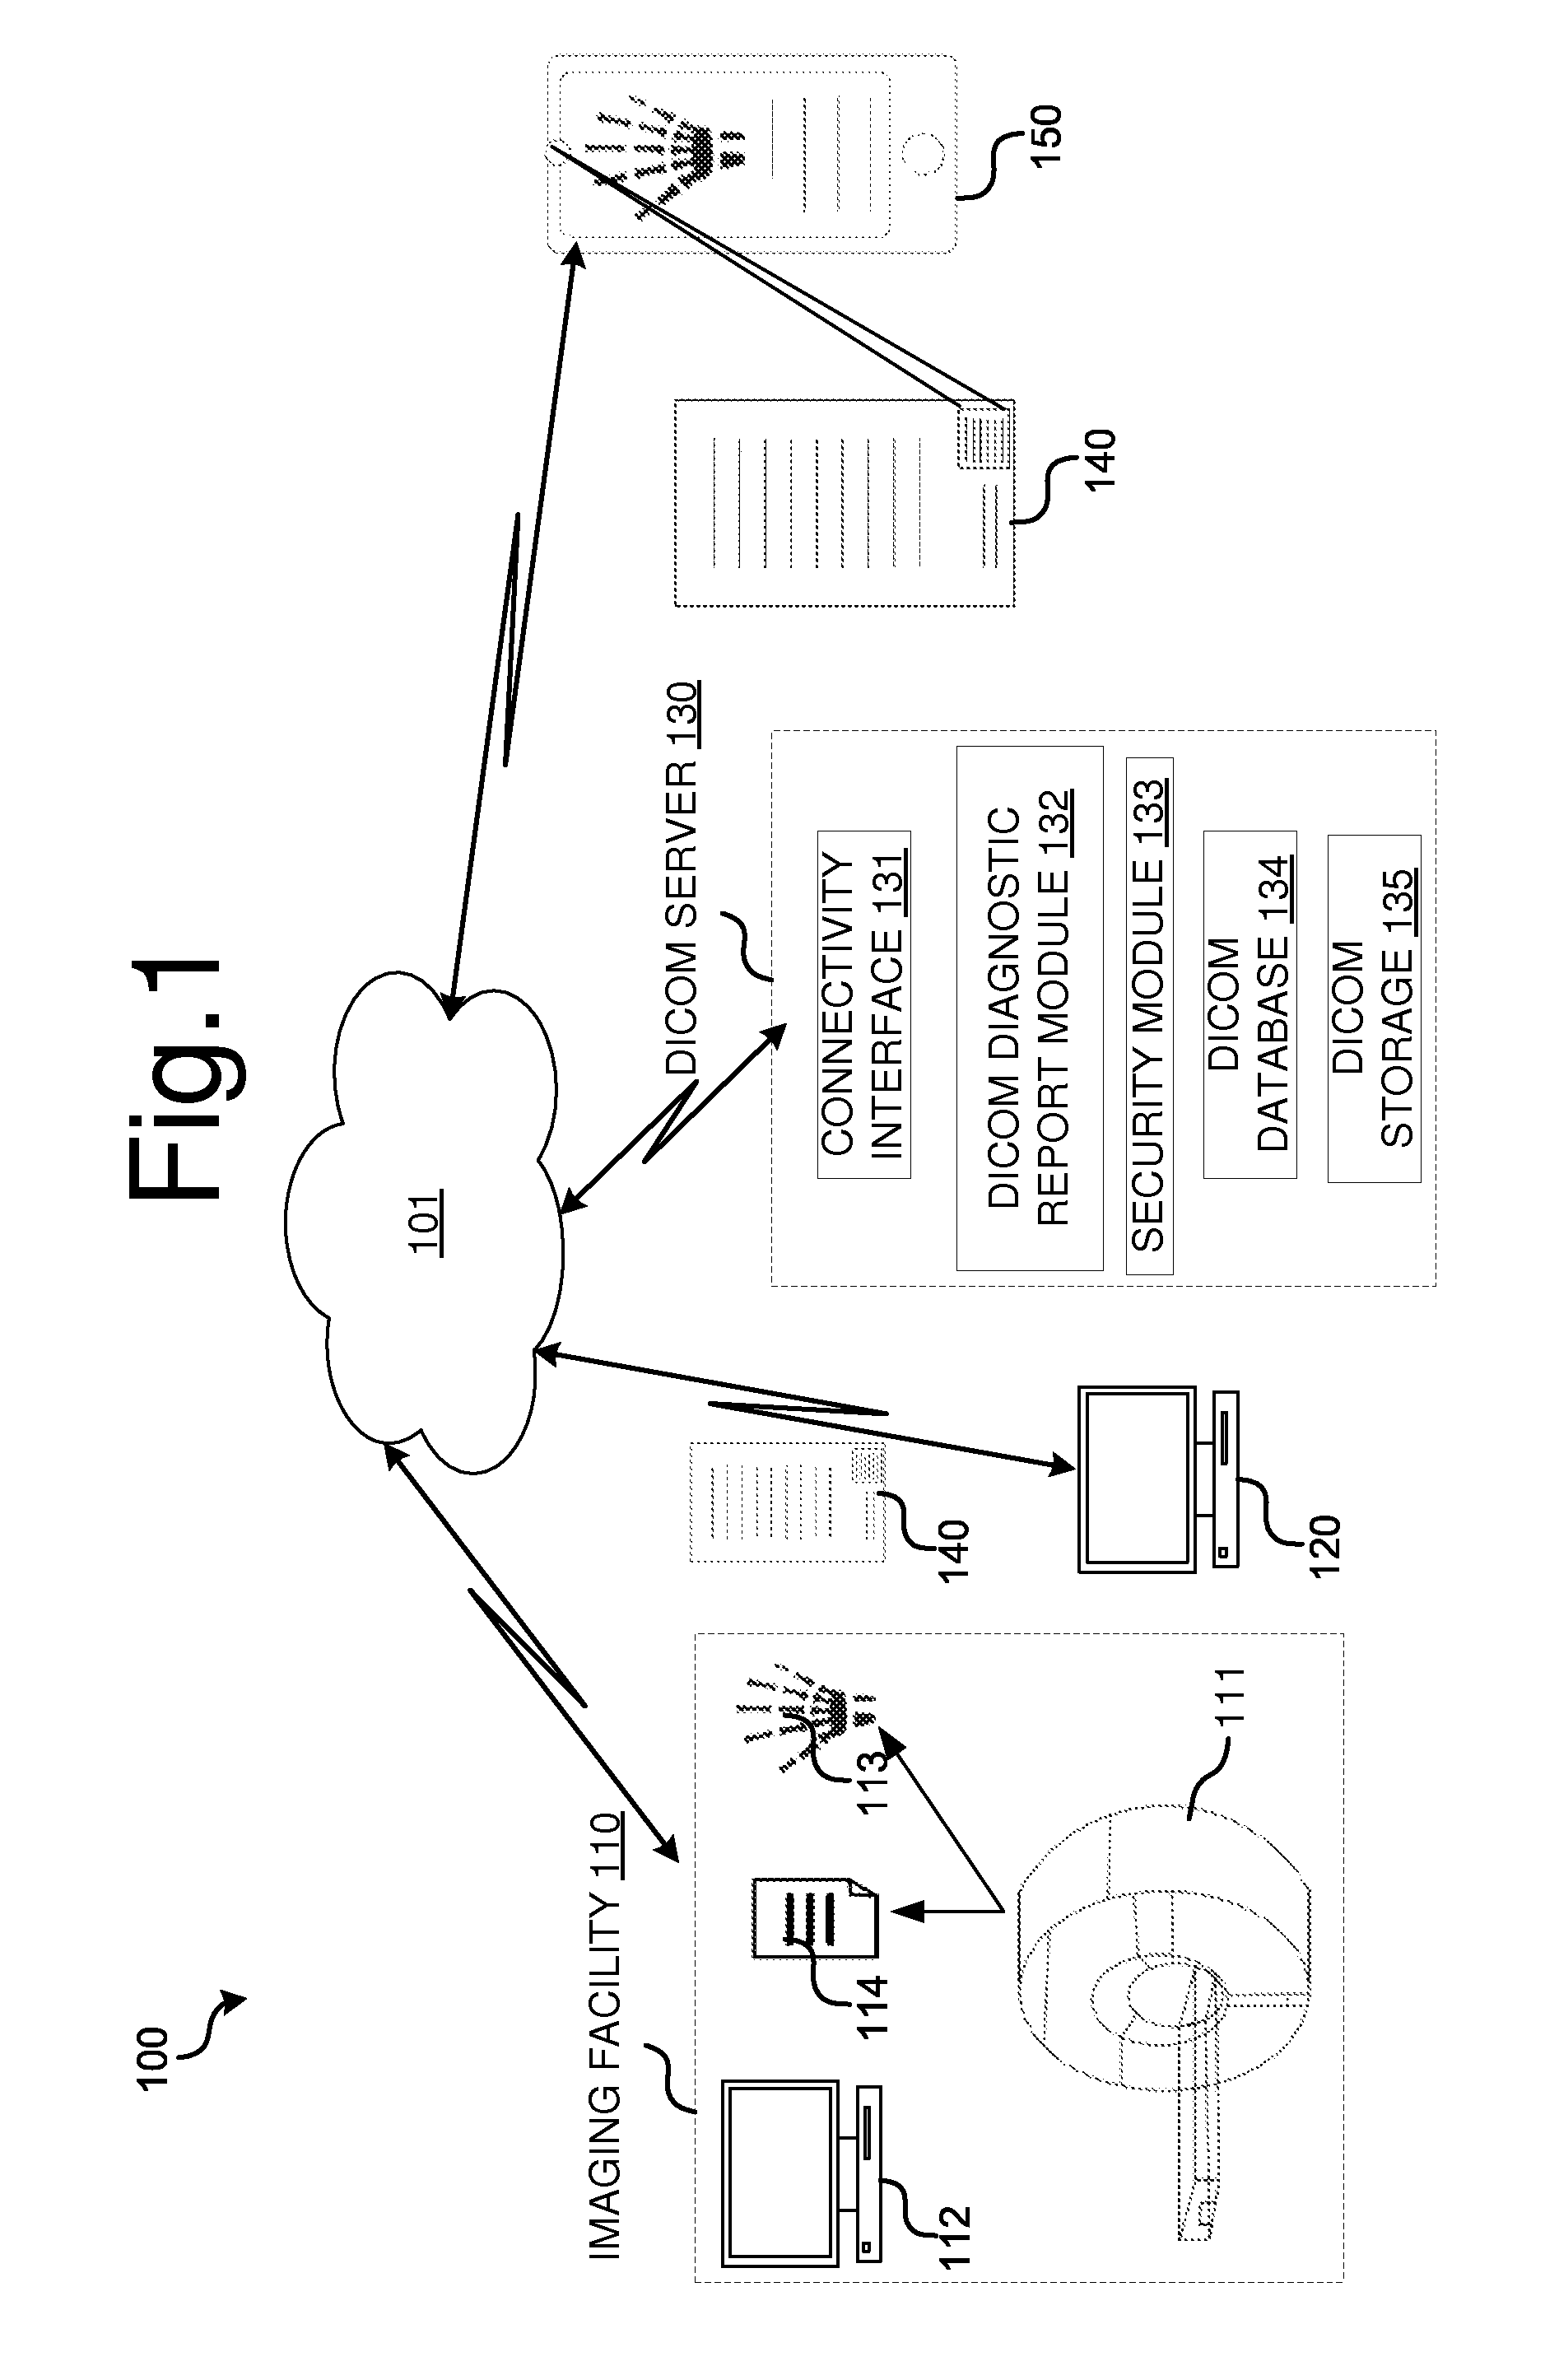 Method and system for distributing and accessing diagnostic images associated with diagnostic imaging report